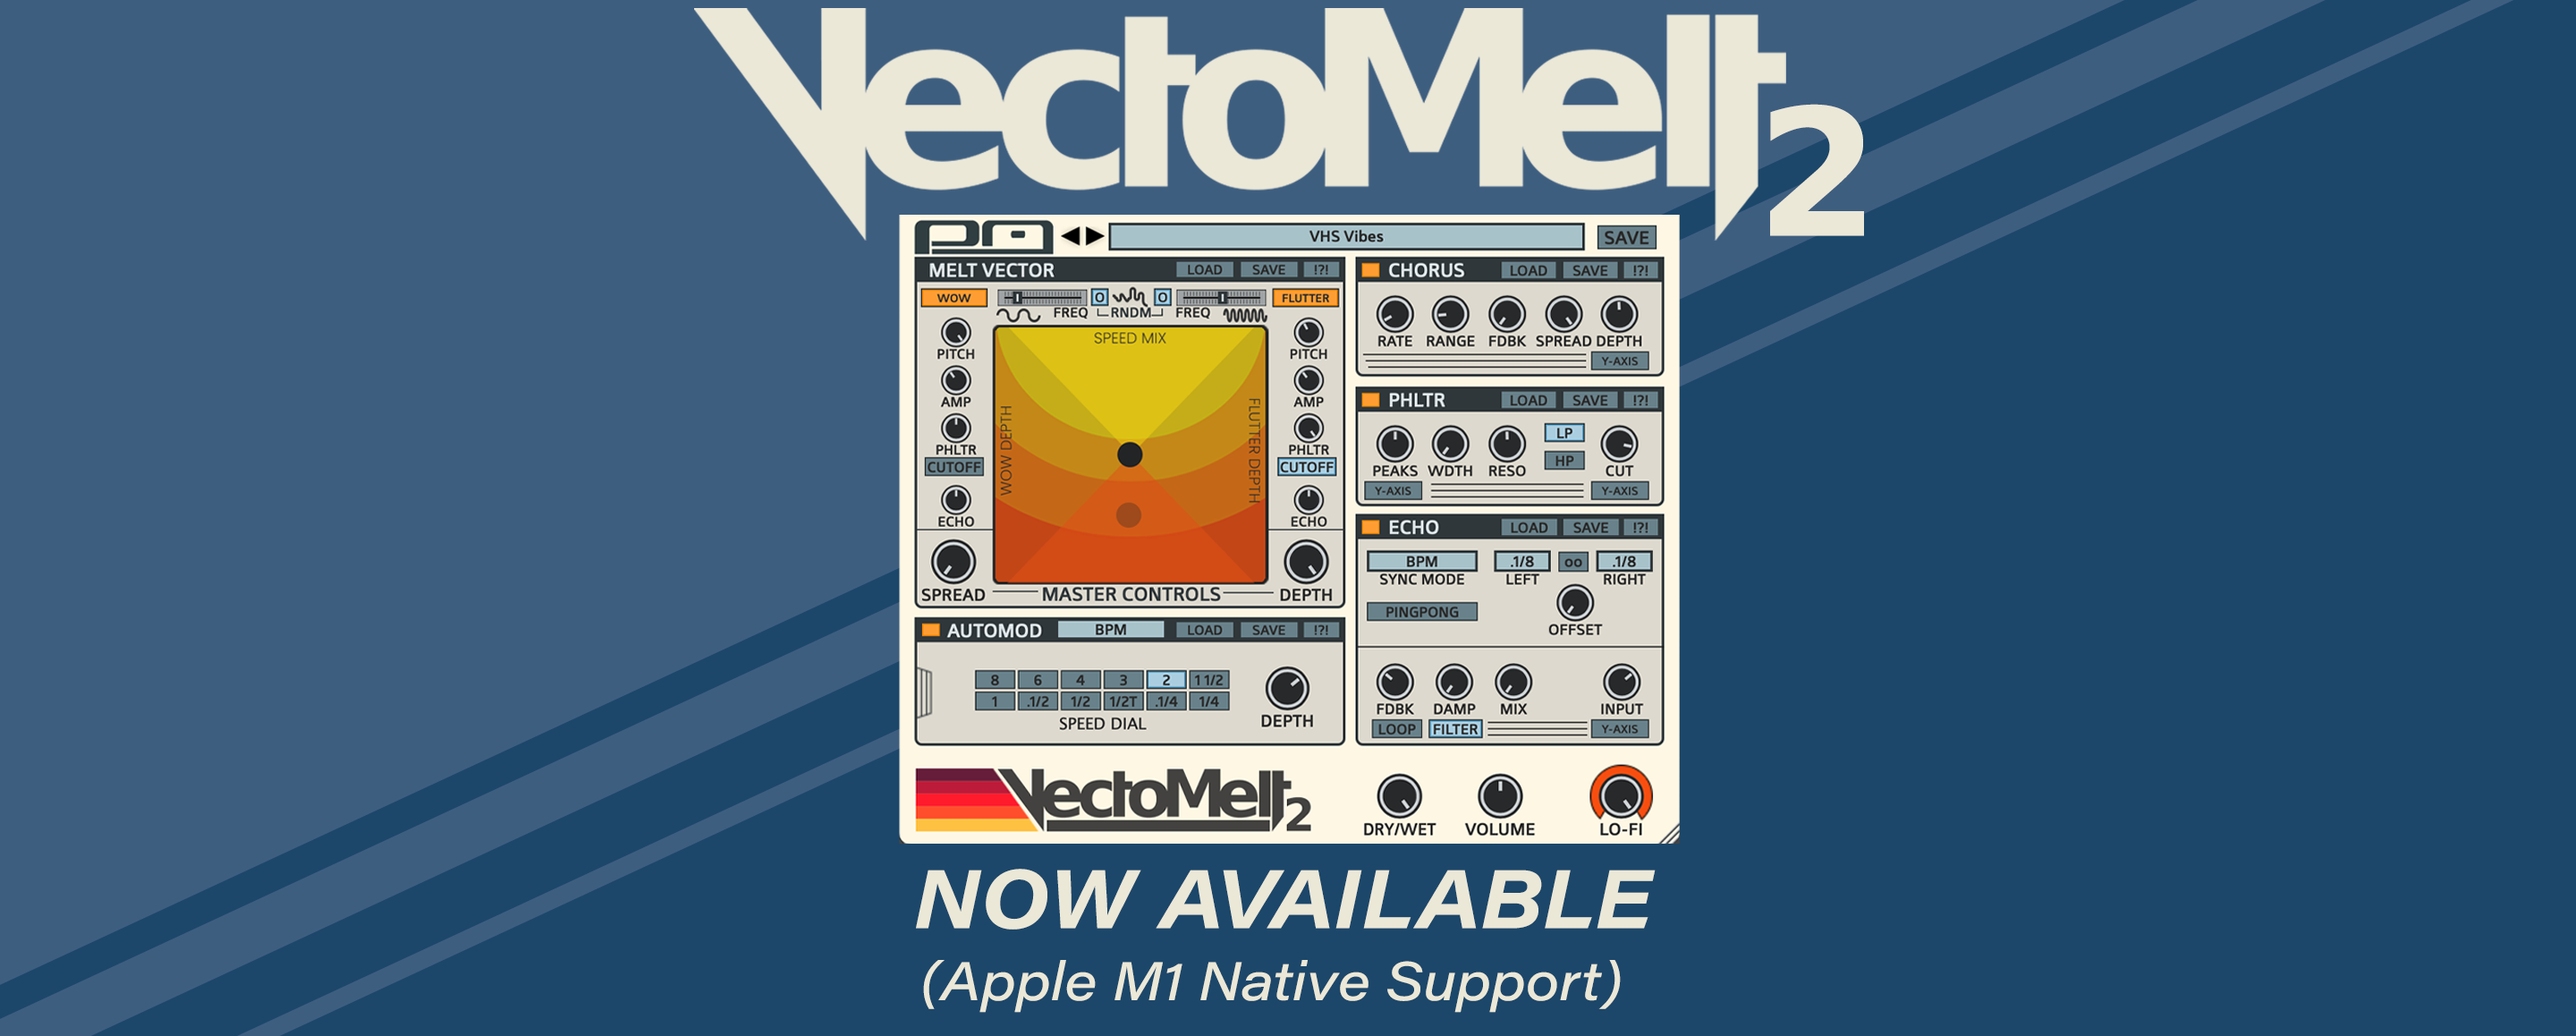 VectoMelt2 is now available!